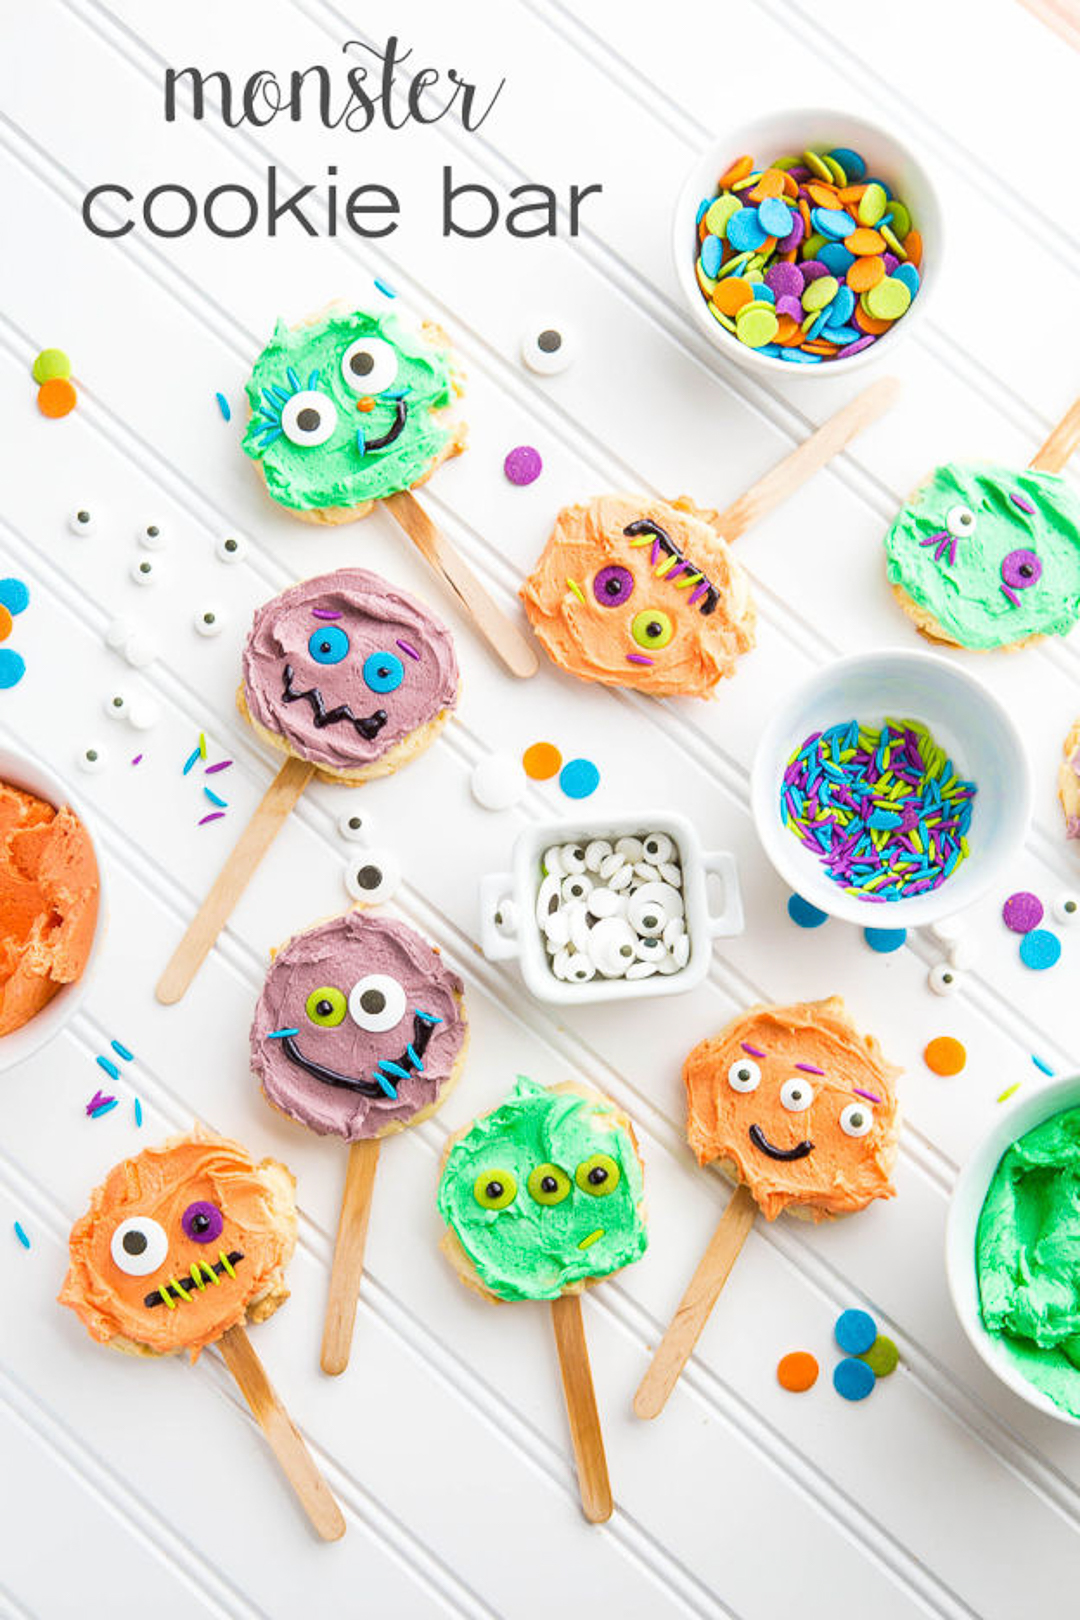 Scary Halloween monster cookies on a stick.